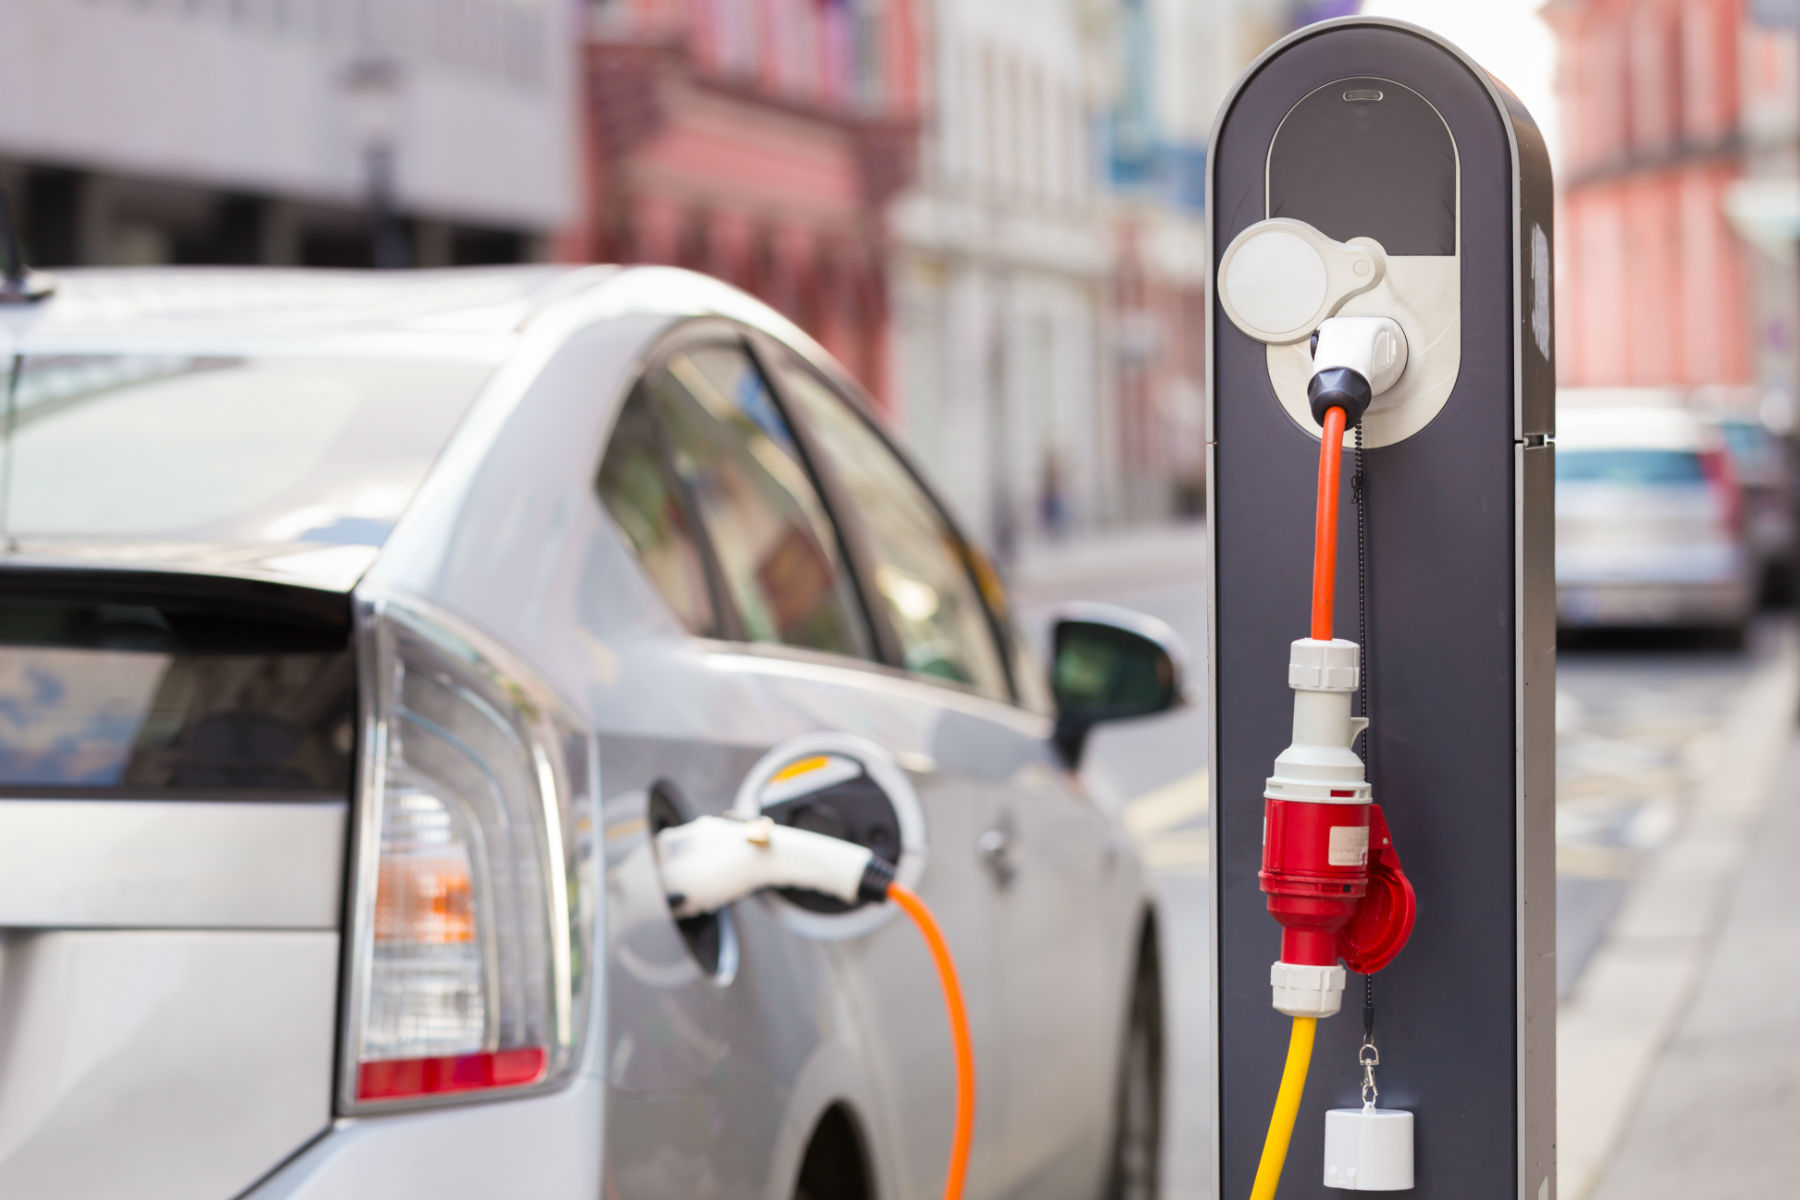 Plug-in hybrids emit more CO2 emissions than diesels, report finds